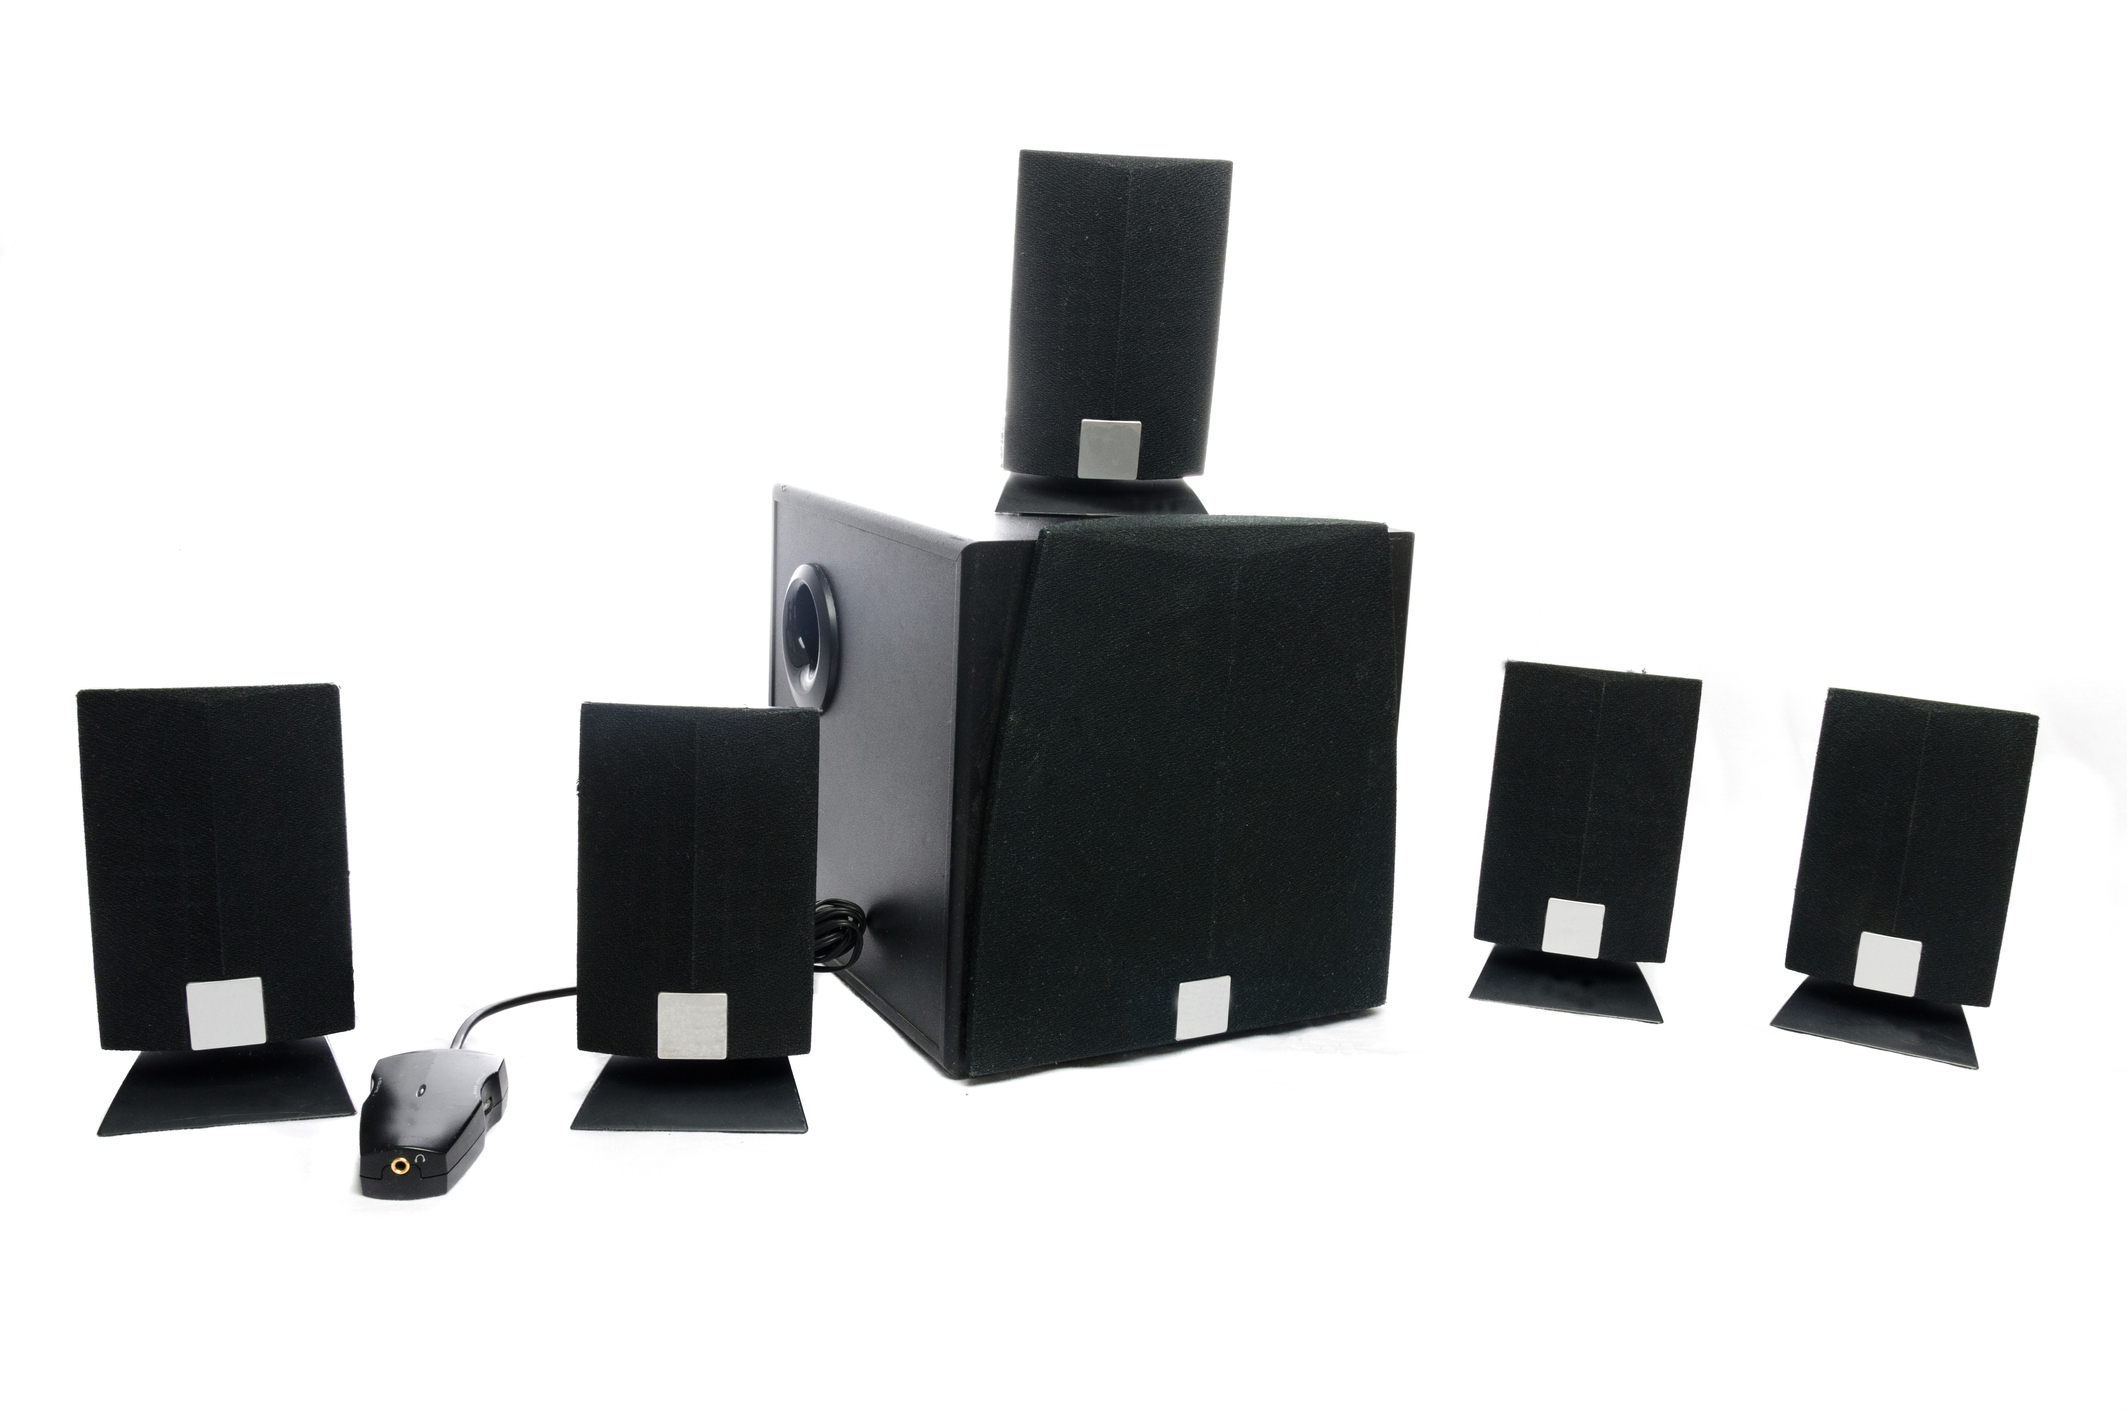 A sound system with speakers